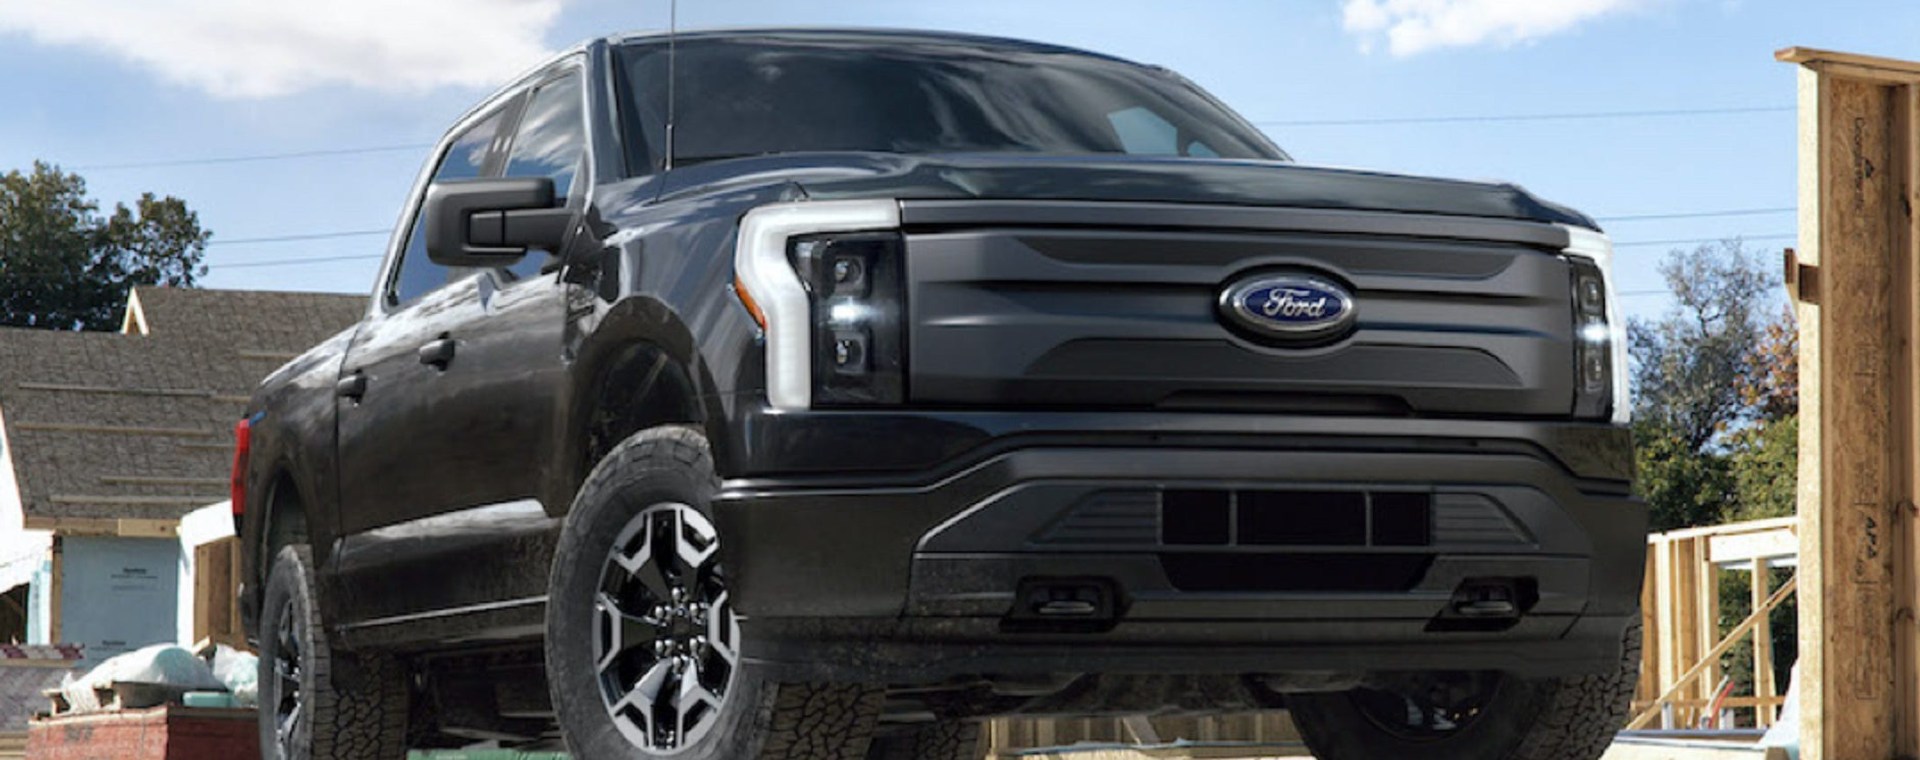 The 2022 Ford F-150 Lightning is the subject of price gouging by Ford dealers